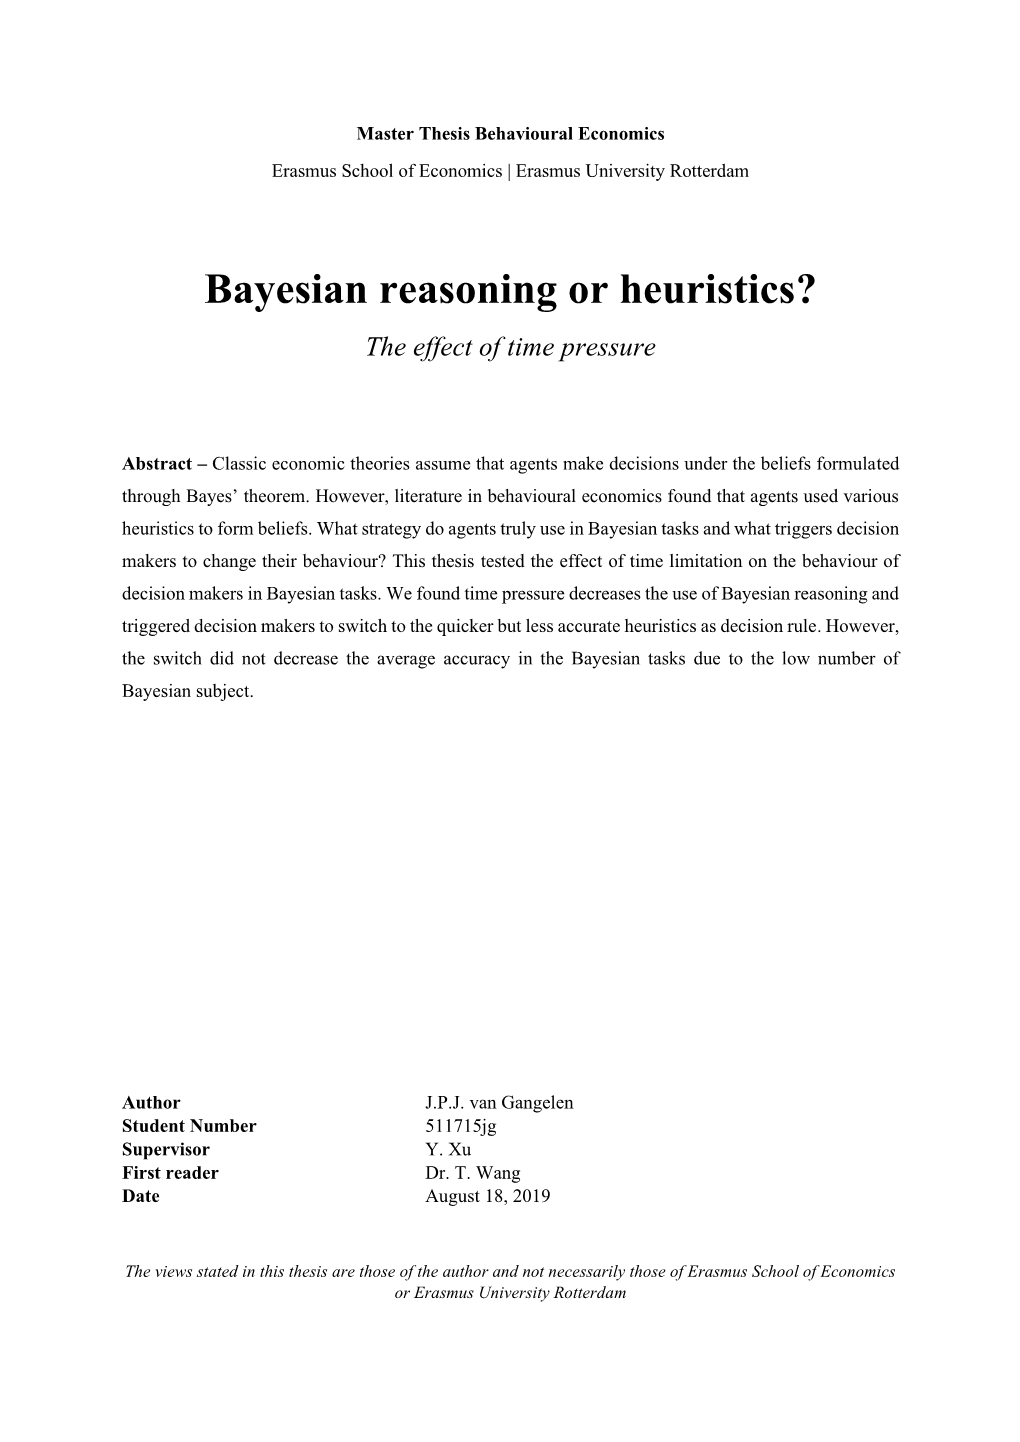 Bayesian Reasoning Or Heuristics? the Effect of Time Pressure